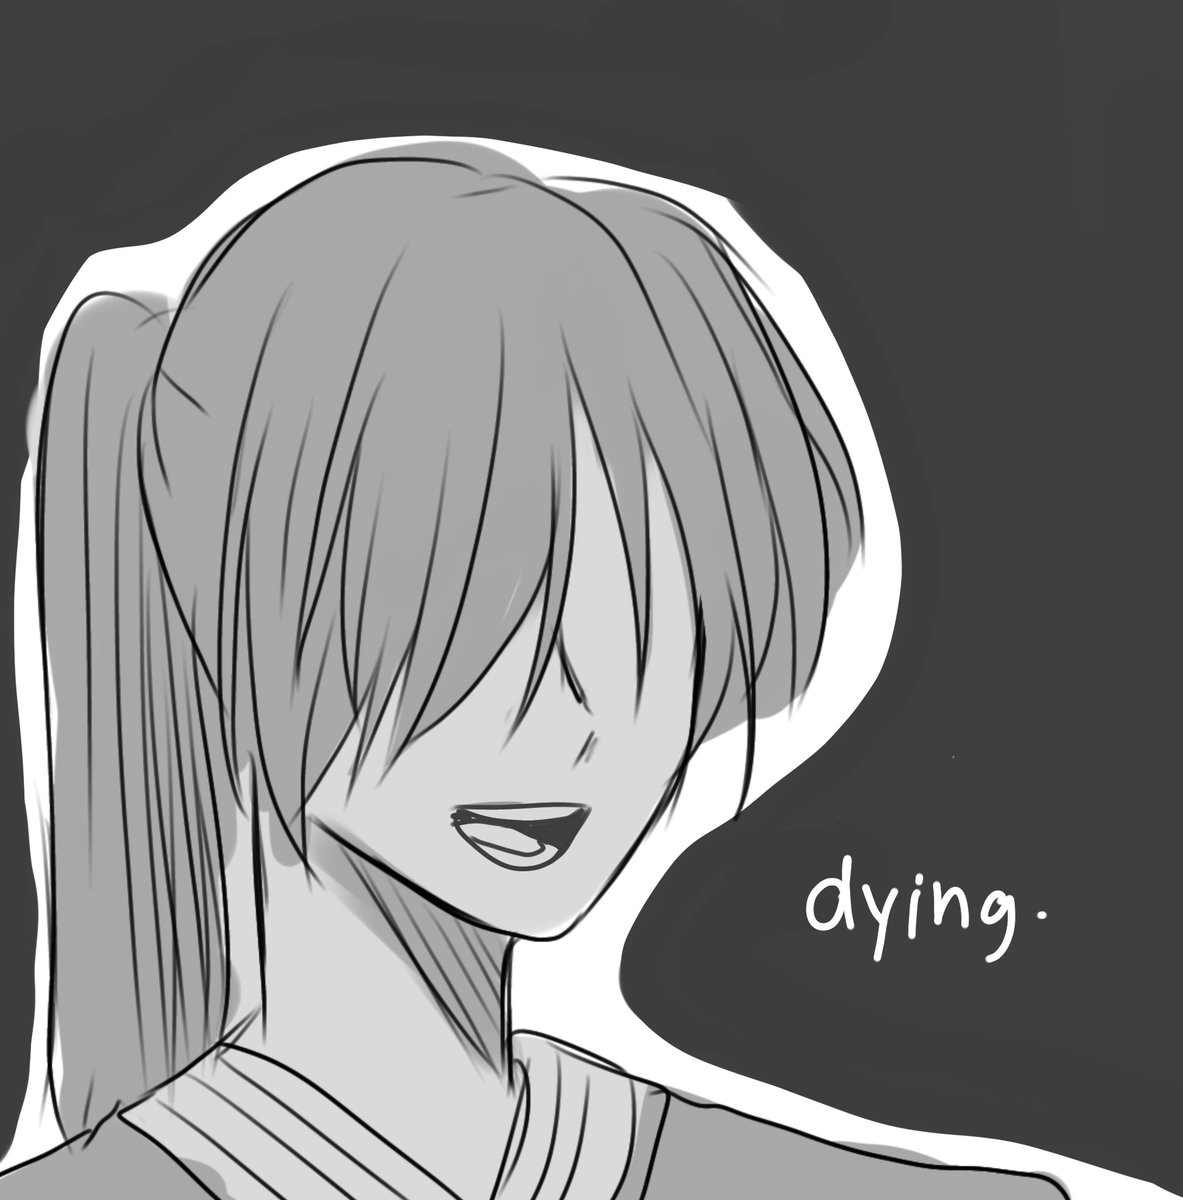 Depressed viole :)
And some angst U_U
Learning how to use twitter pt.2
#TowerOfGod #jueviolegrace 